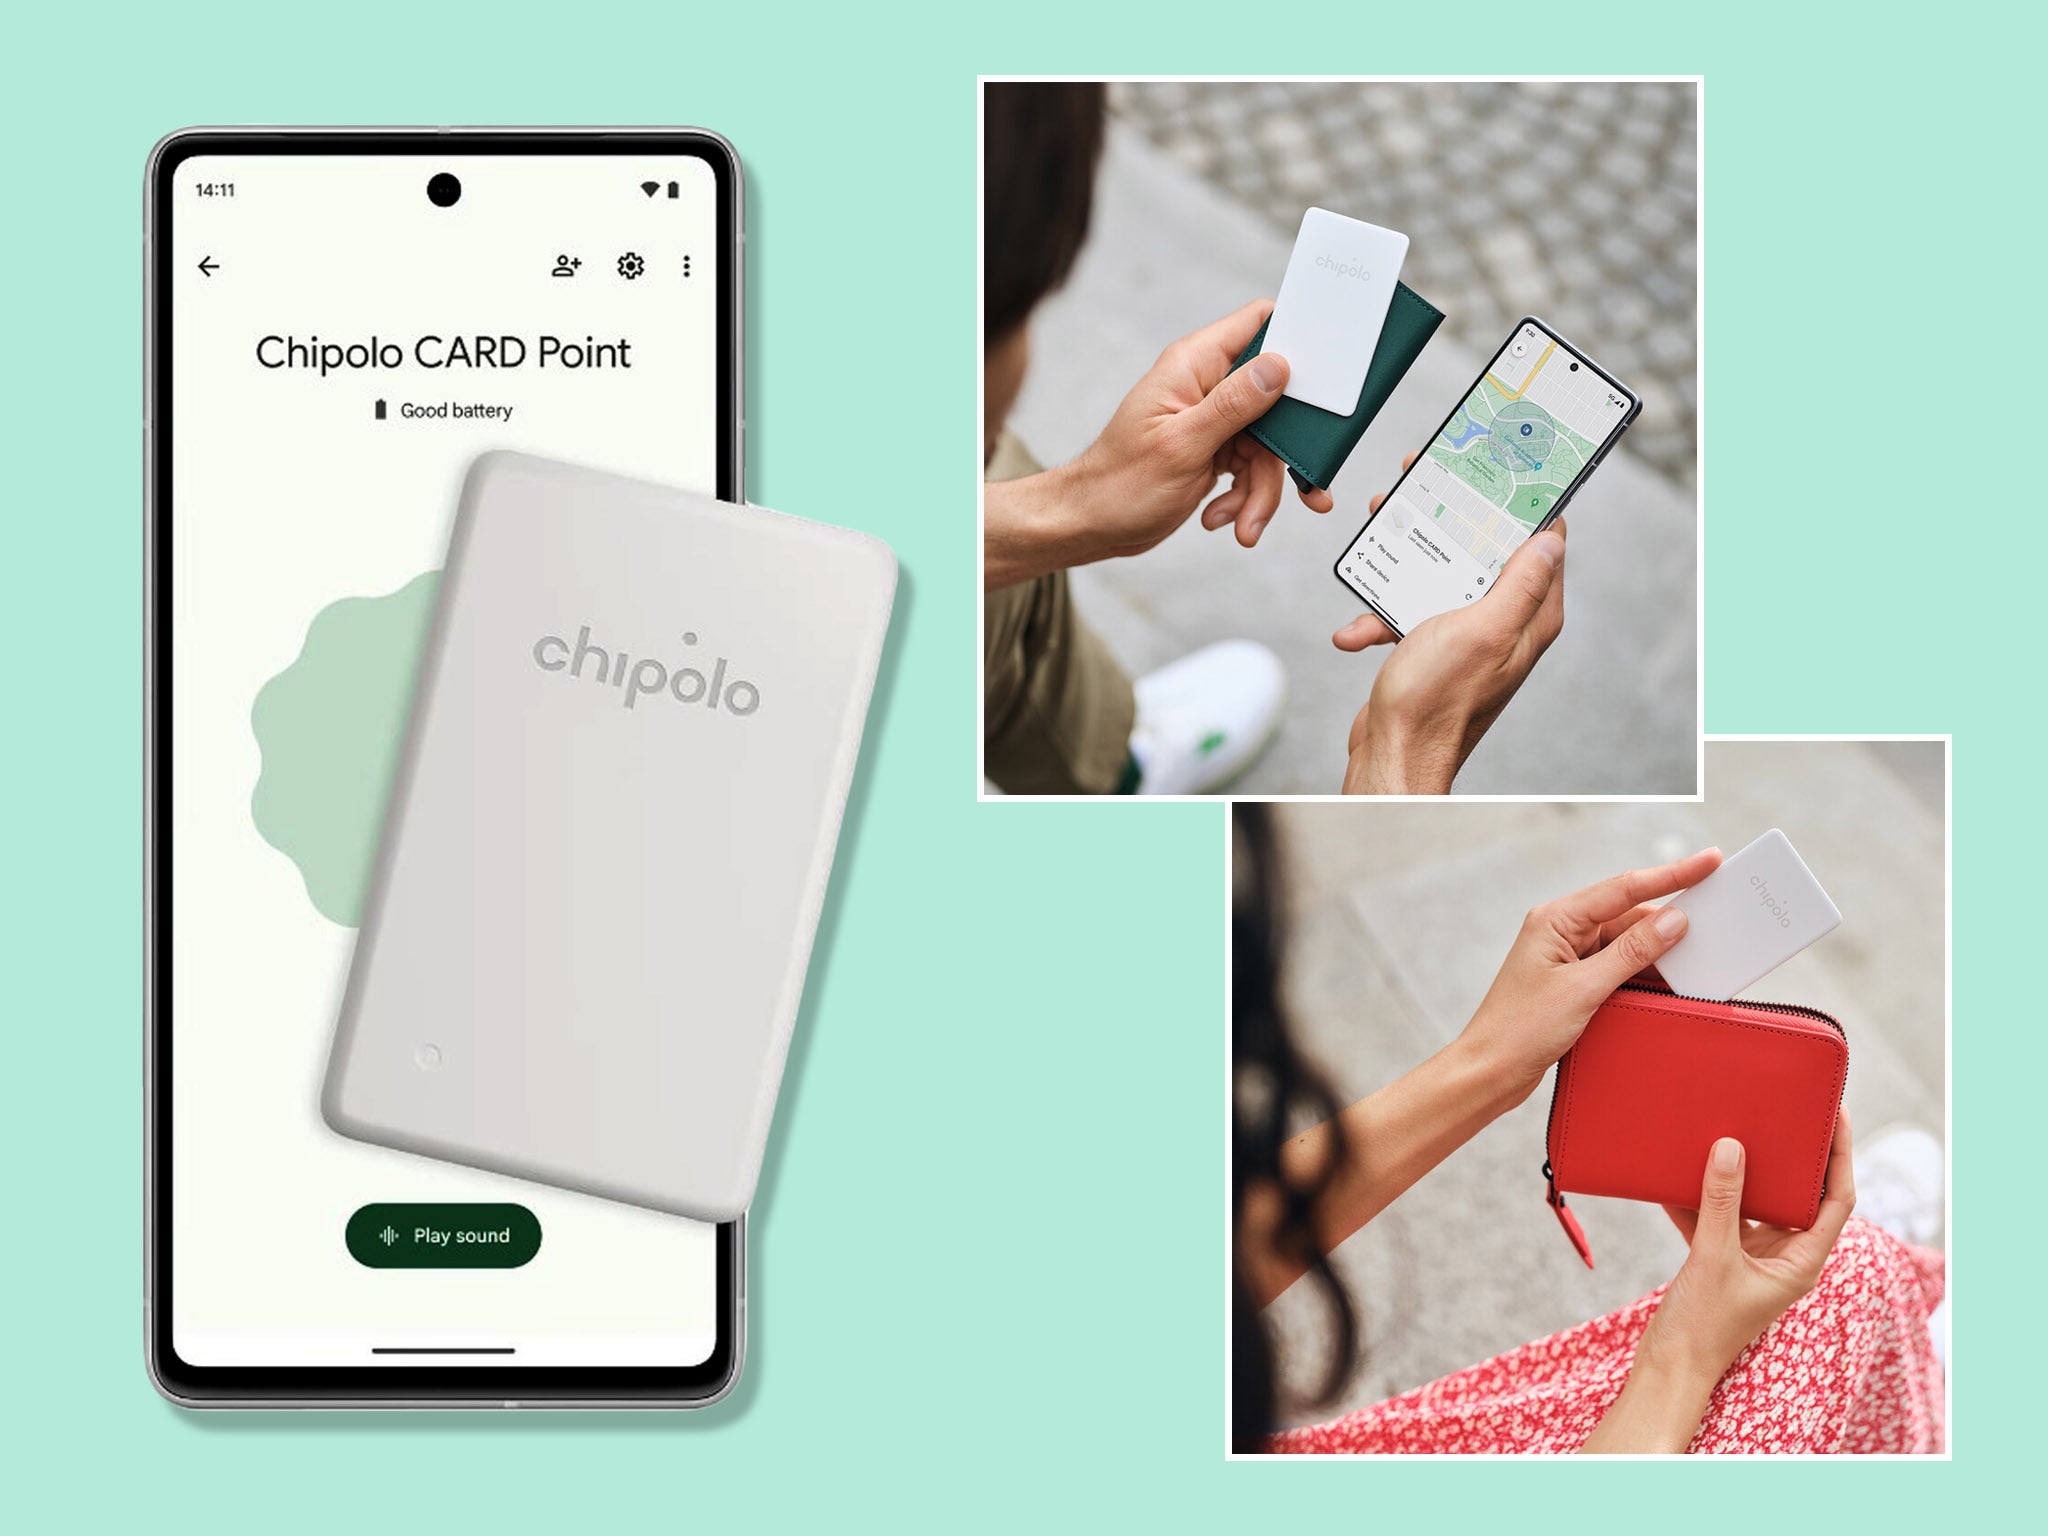 This new Chipolo tracker is an Android AirTag for Google's Find My